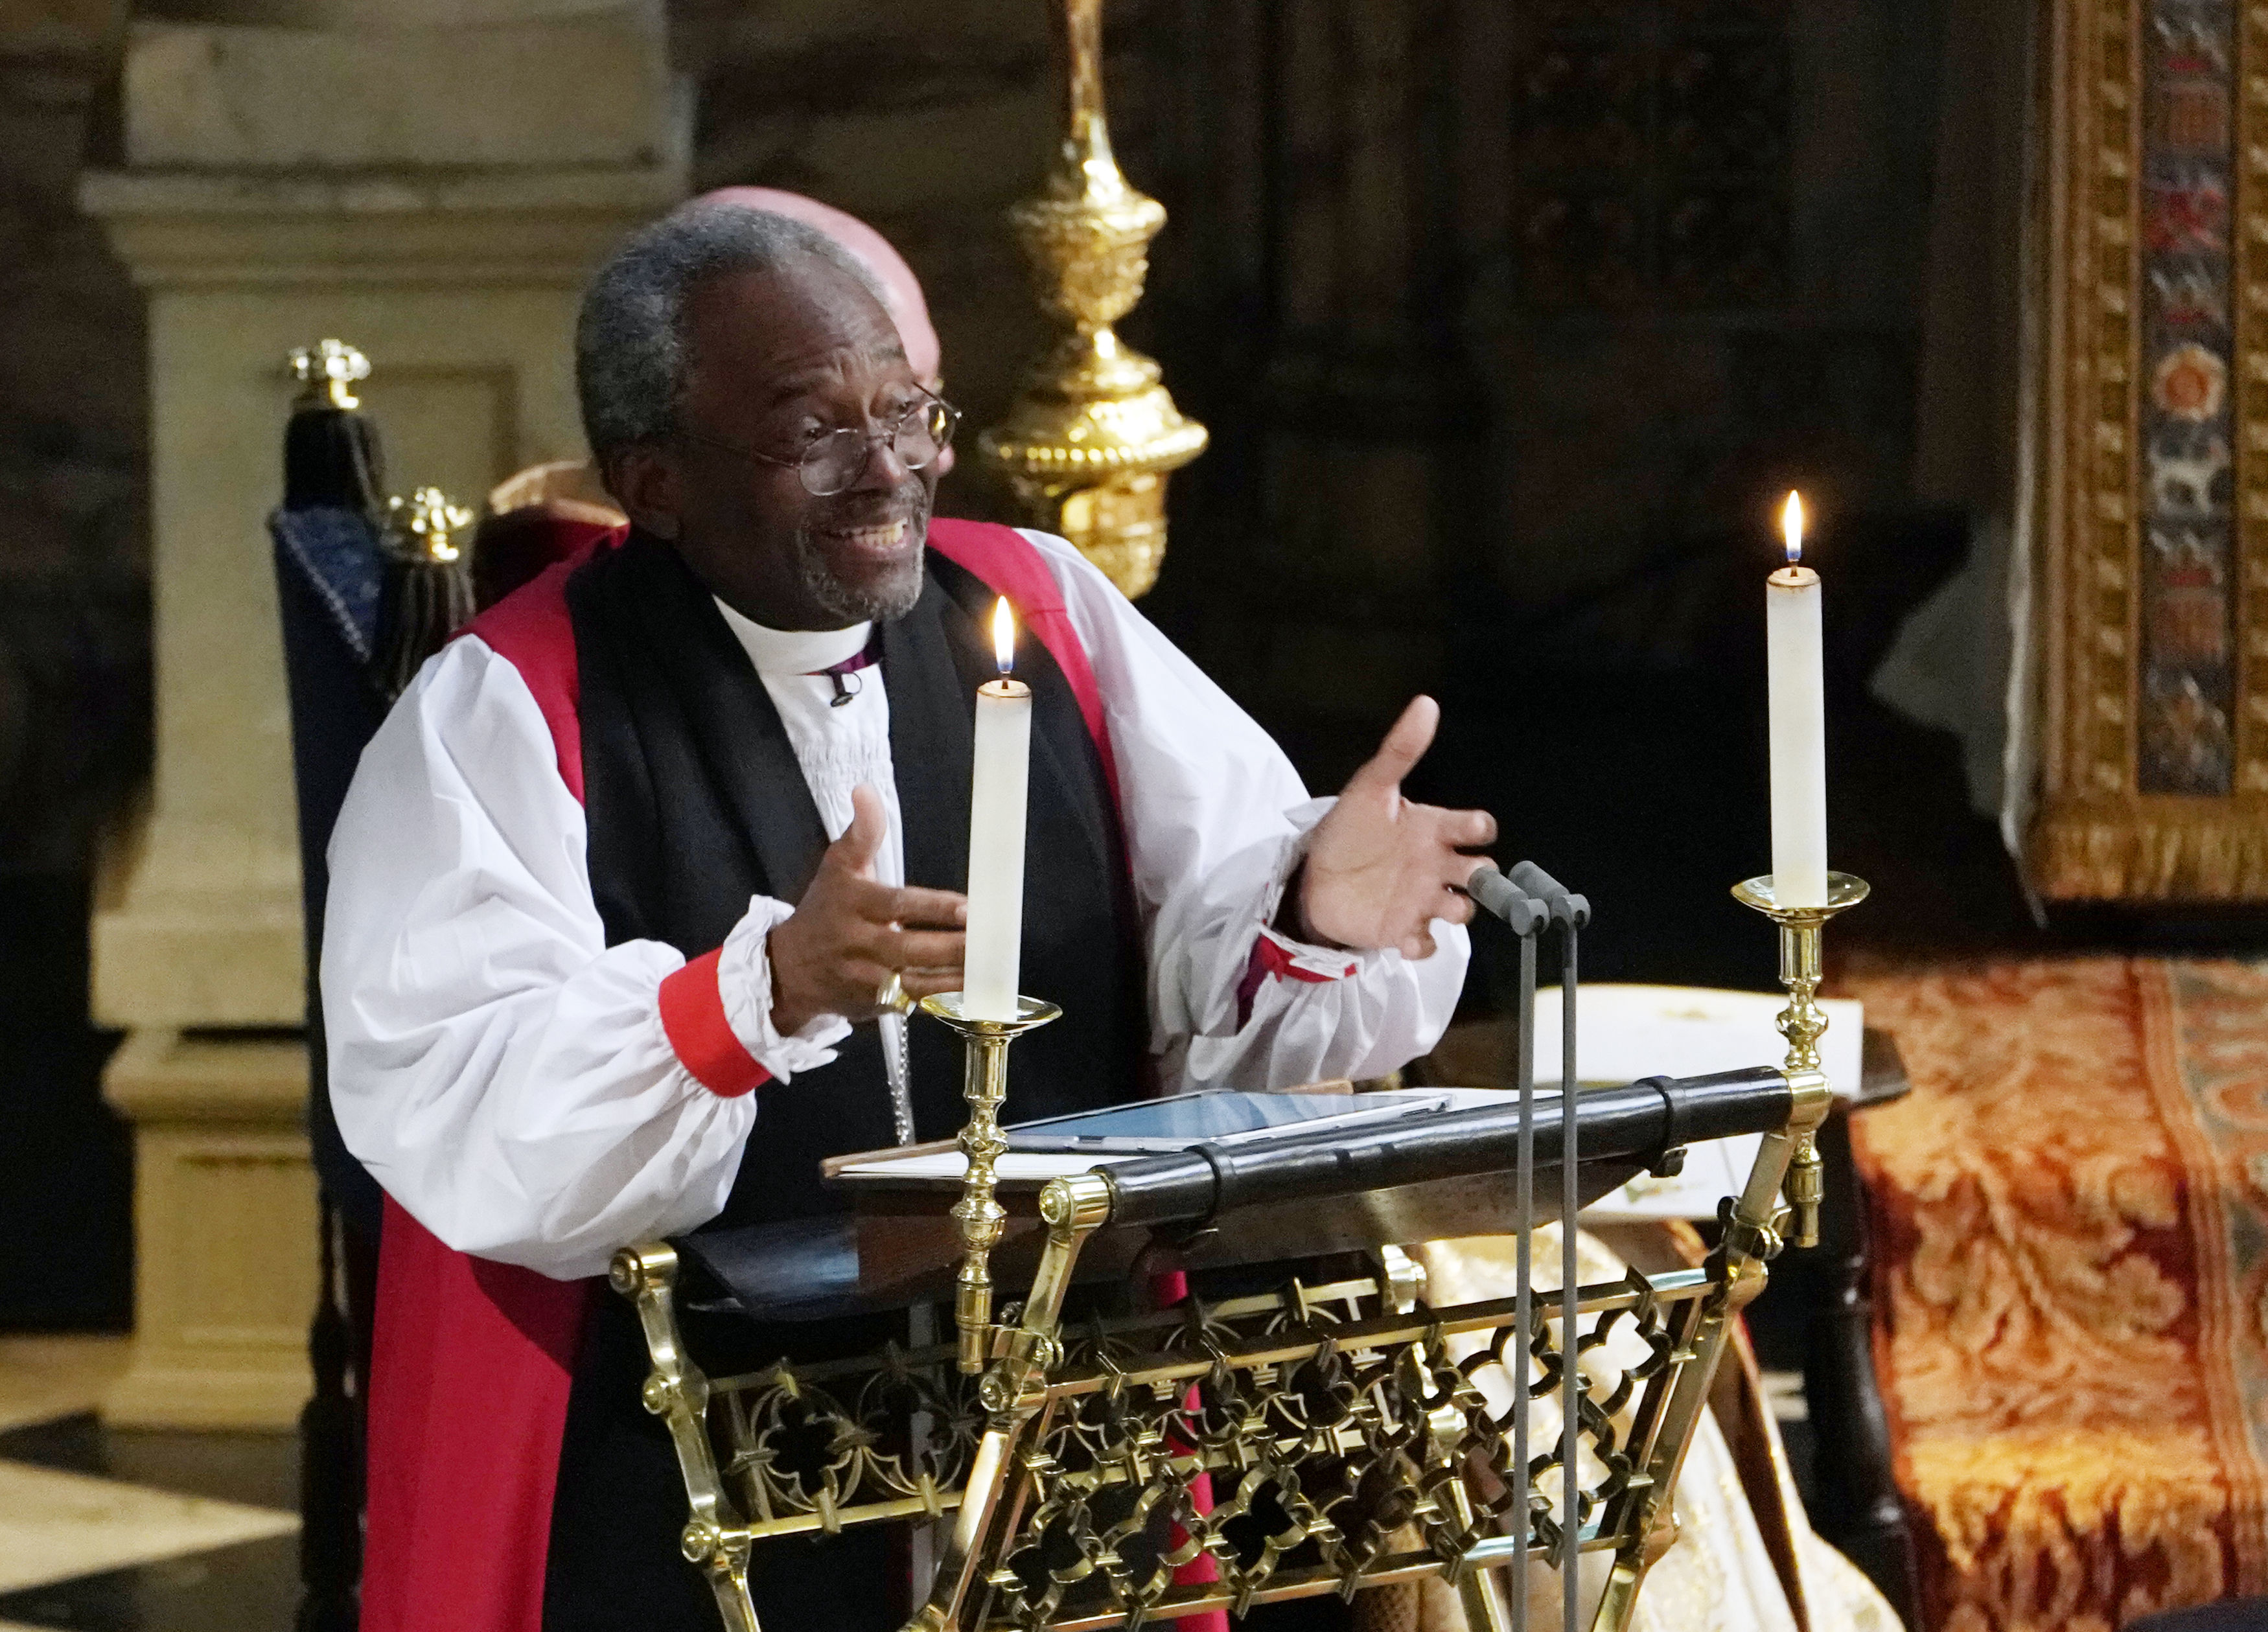 The Most Rev Bishop Michael Curry, primate of the Episcopal Church, gives an address during the wedding of Prince Harry and Meghan Markle in St George's Chapel at Windsor Castle on May 19, 2018 in Windsor, England. (WPA Pool—Getty Images)